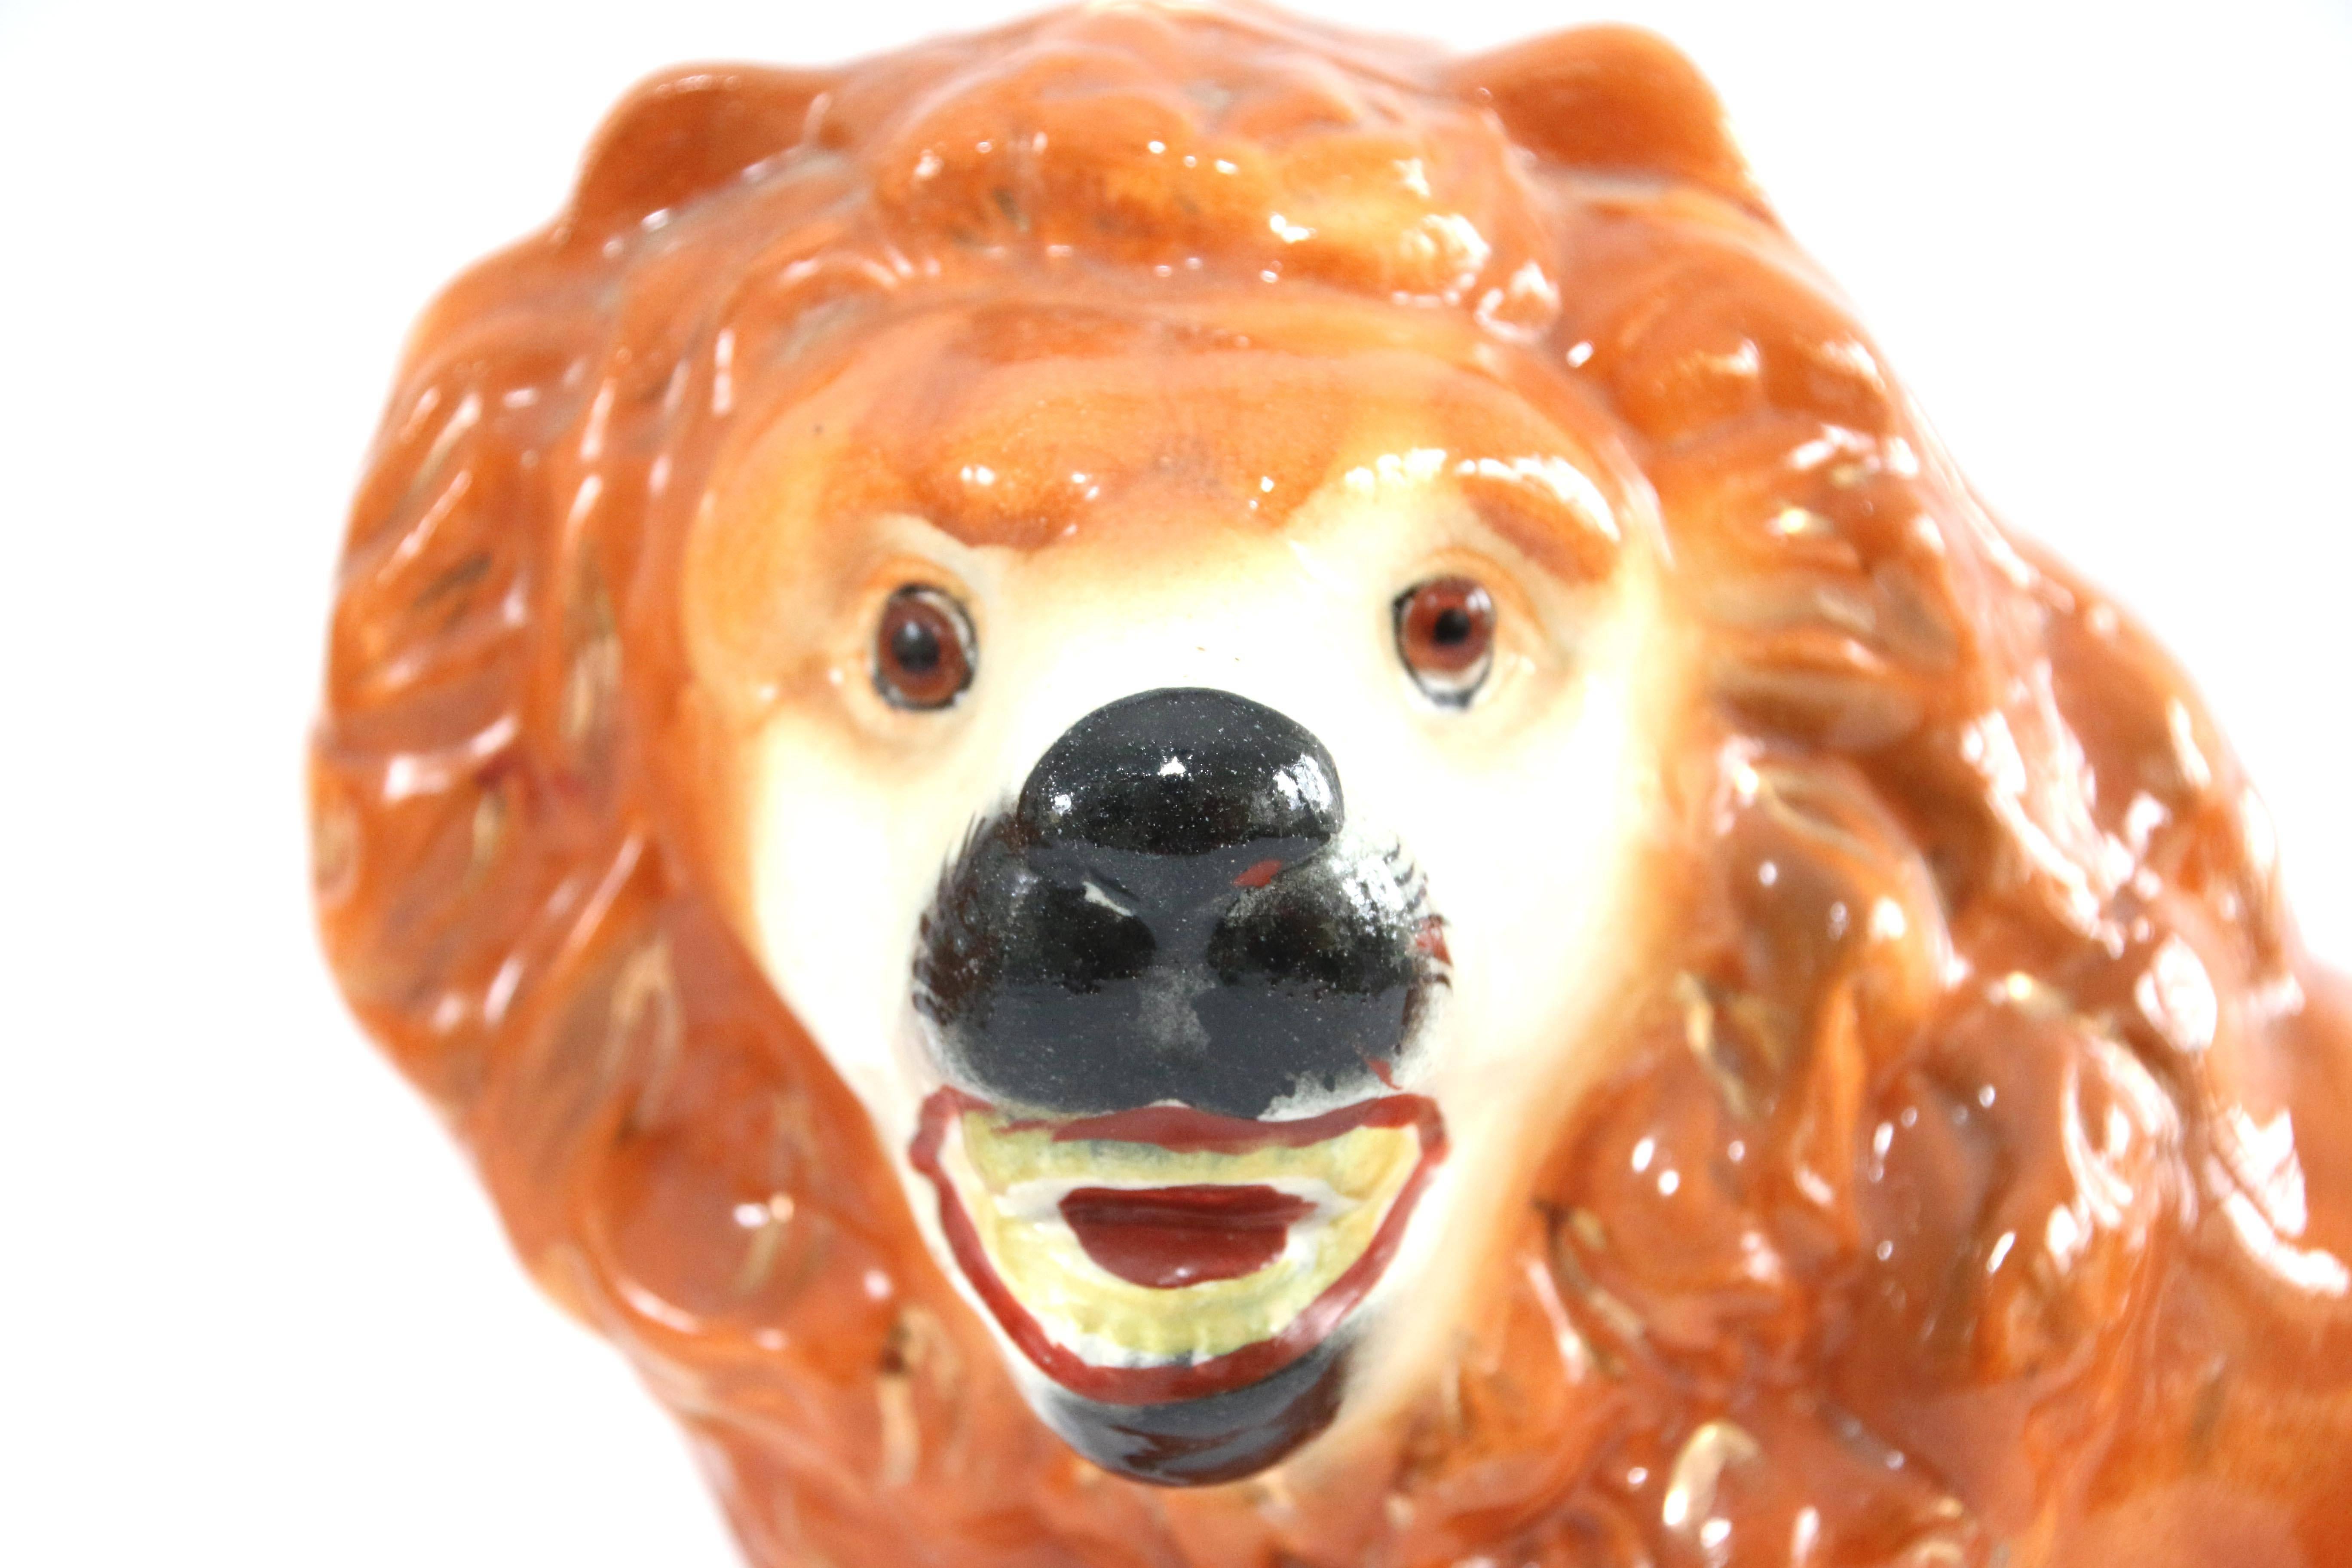 Pair of 19th century porcelain Staffordshire lions with glass eyes, circa 1870.